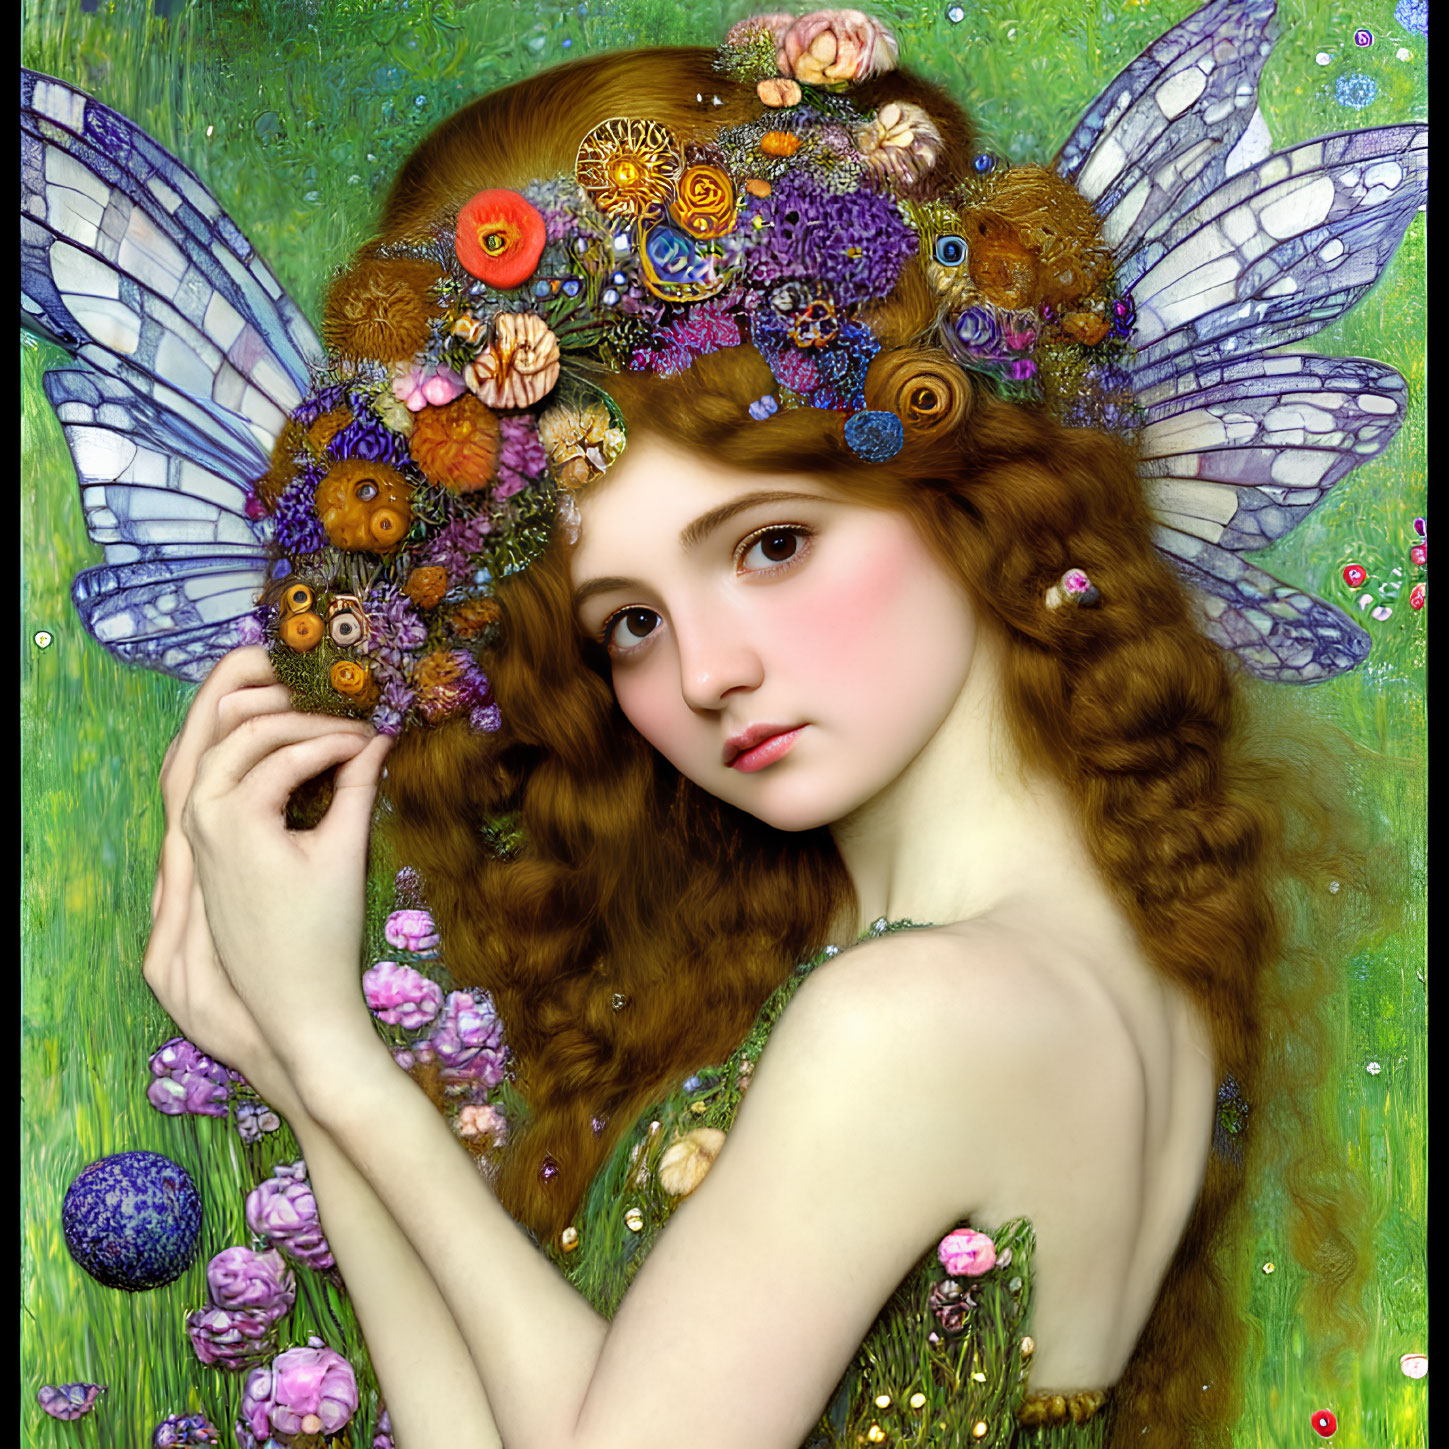 Colorful Fairy Artwork with Flowers and Iridescent Wings